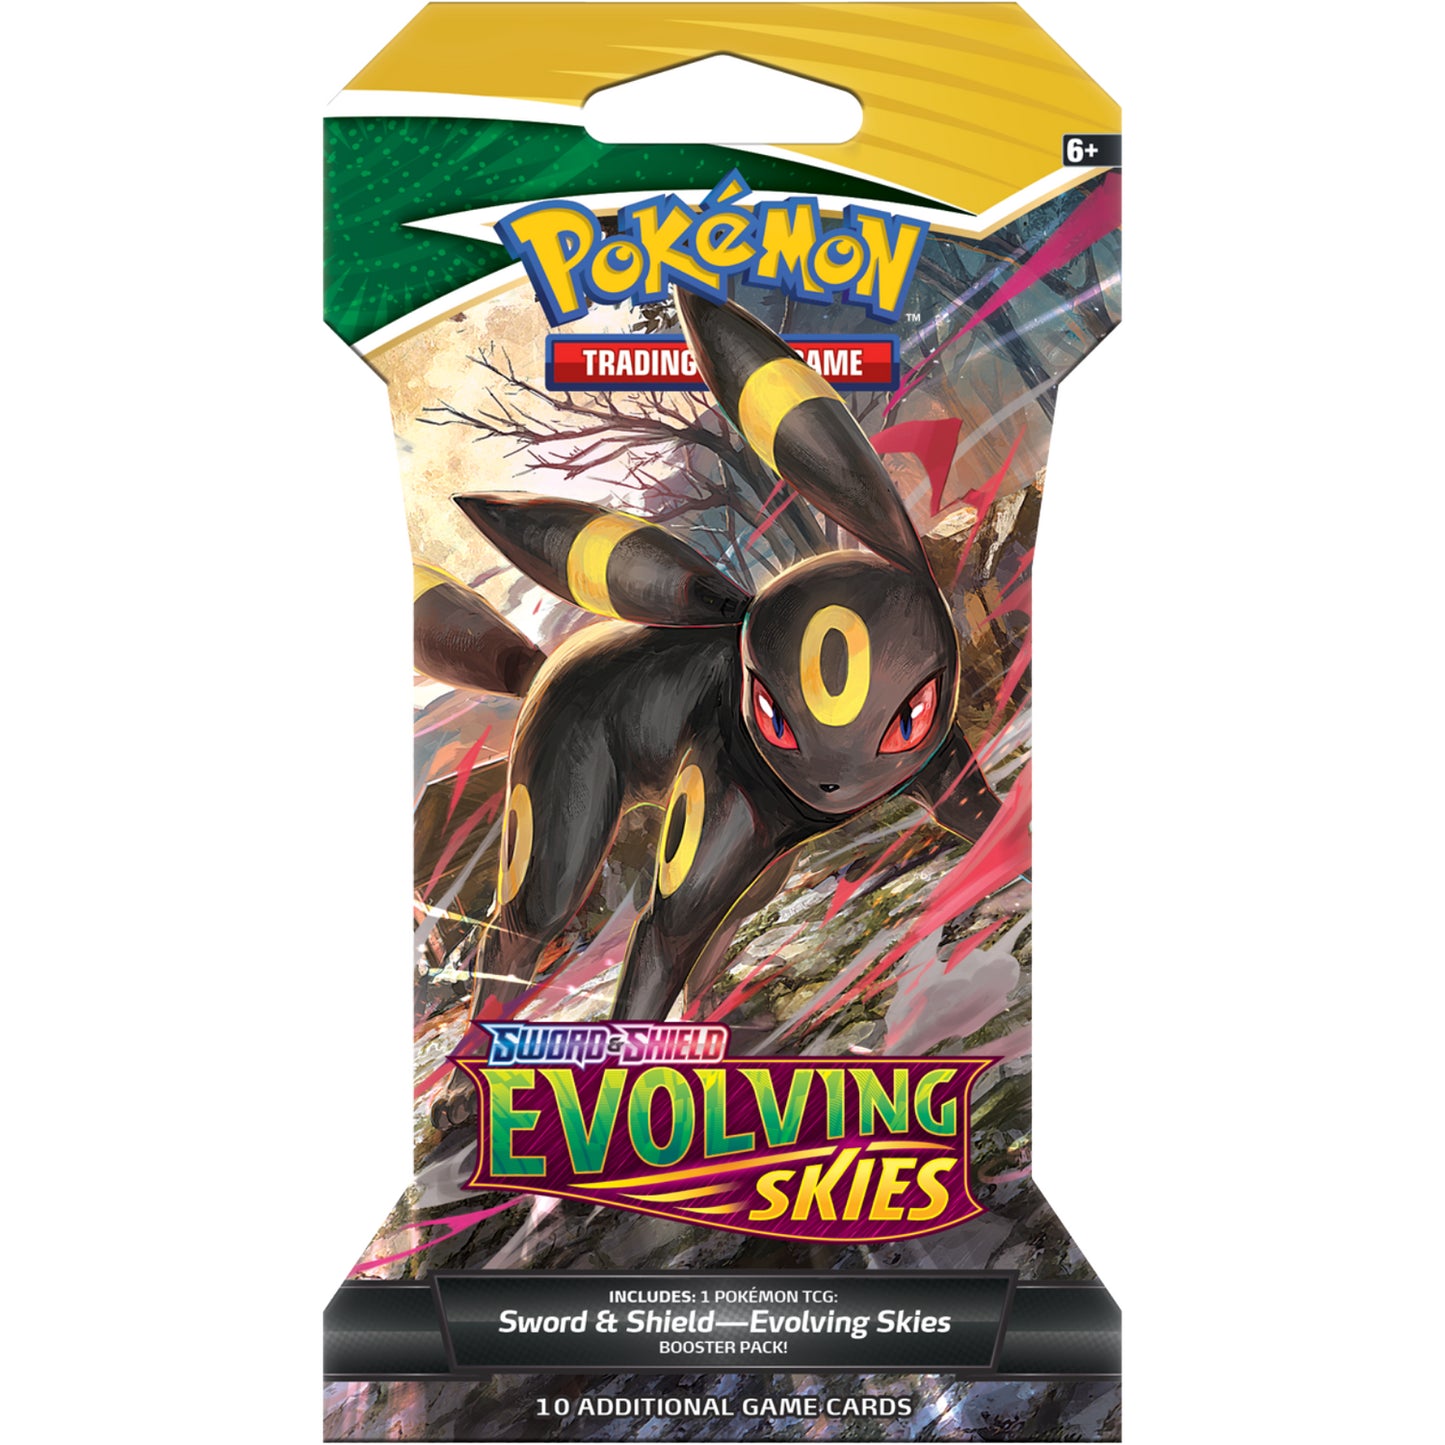 Evolving Skies Sleeved Booster Pack | Pokémon Trading Card Game